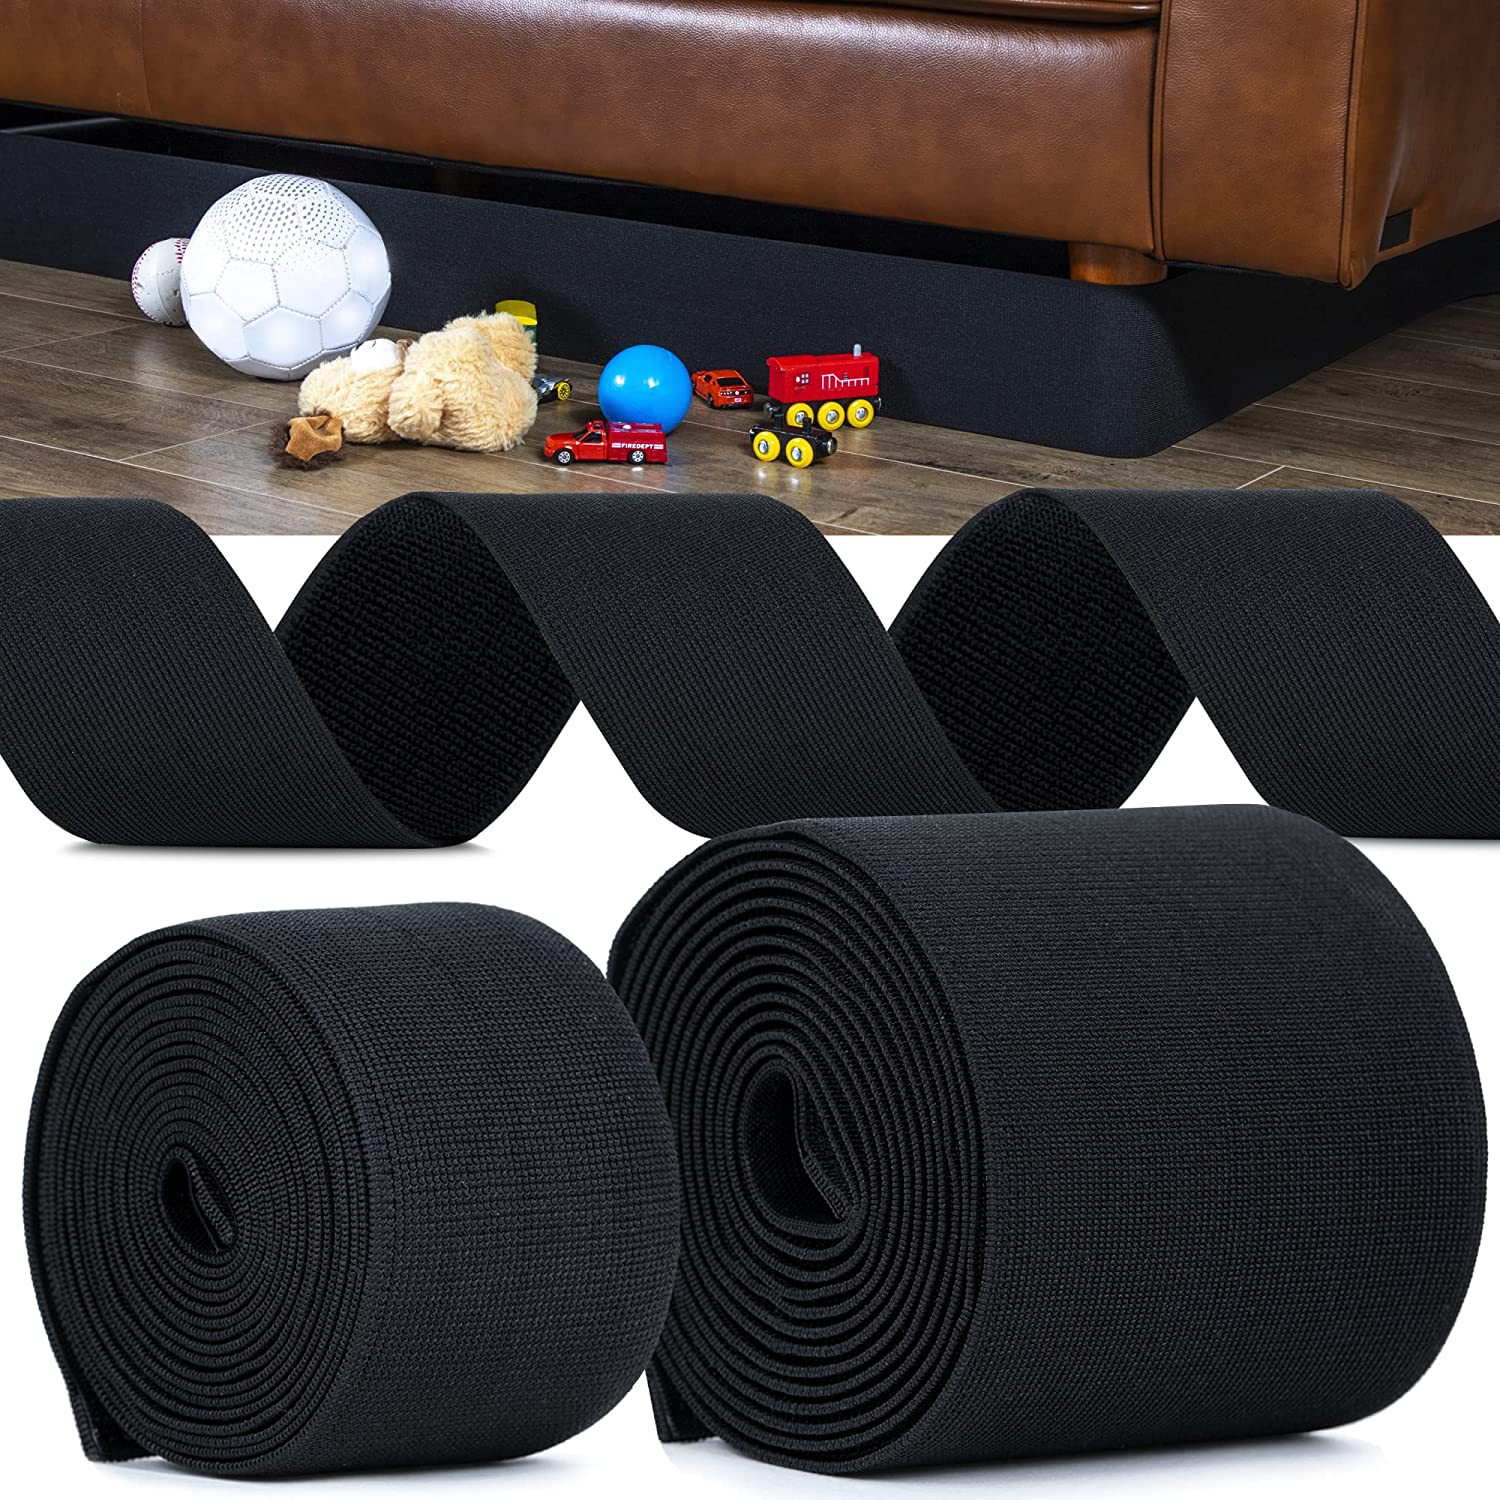 Under Couch Blocker for Toys Reusable Toys Blocker Under Sofa with